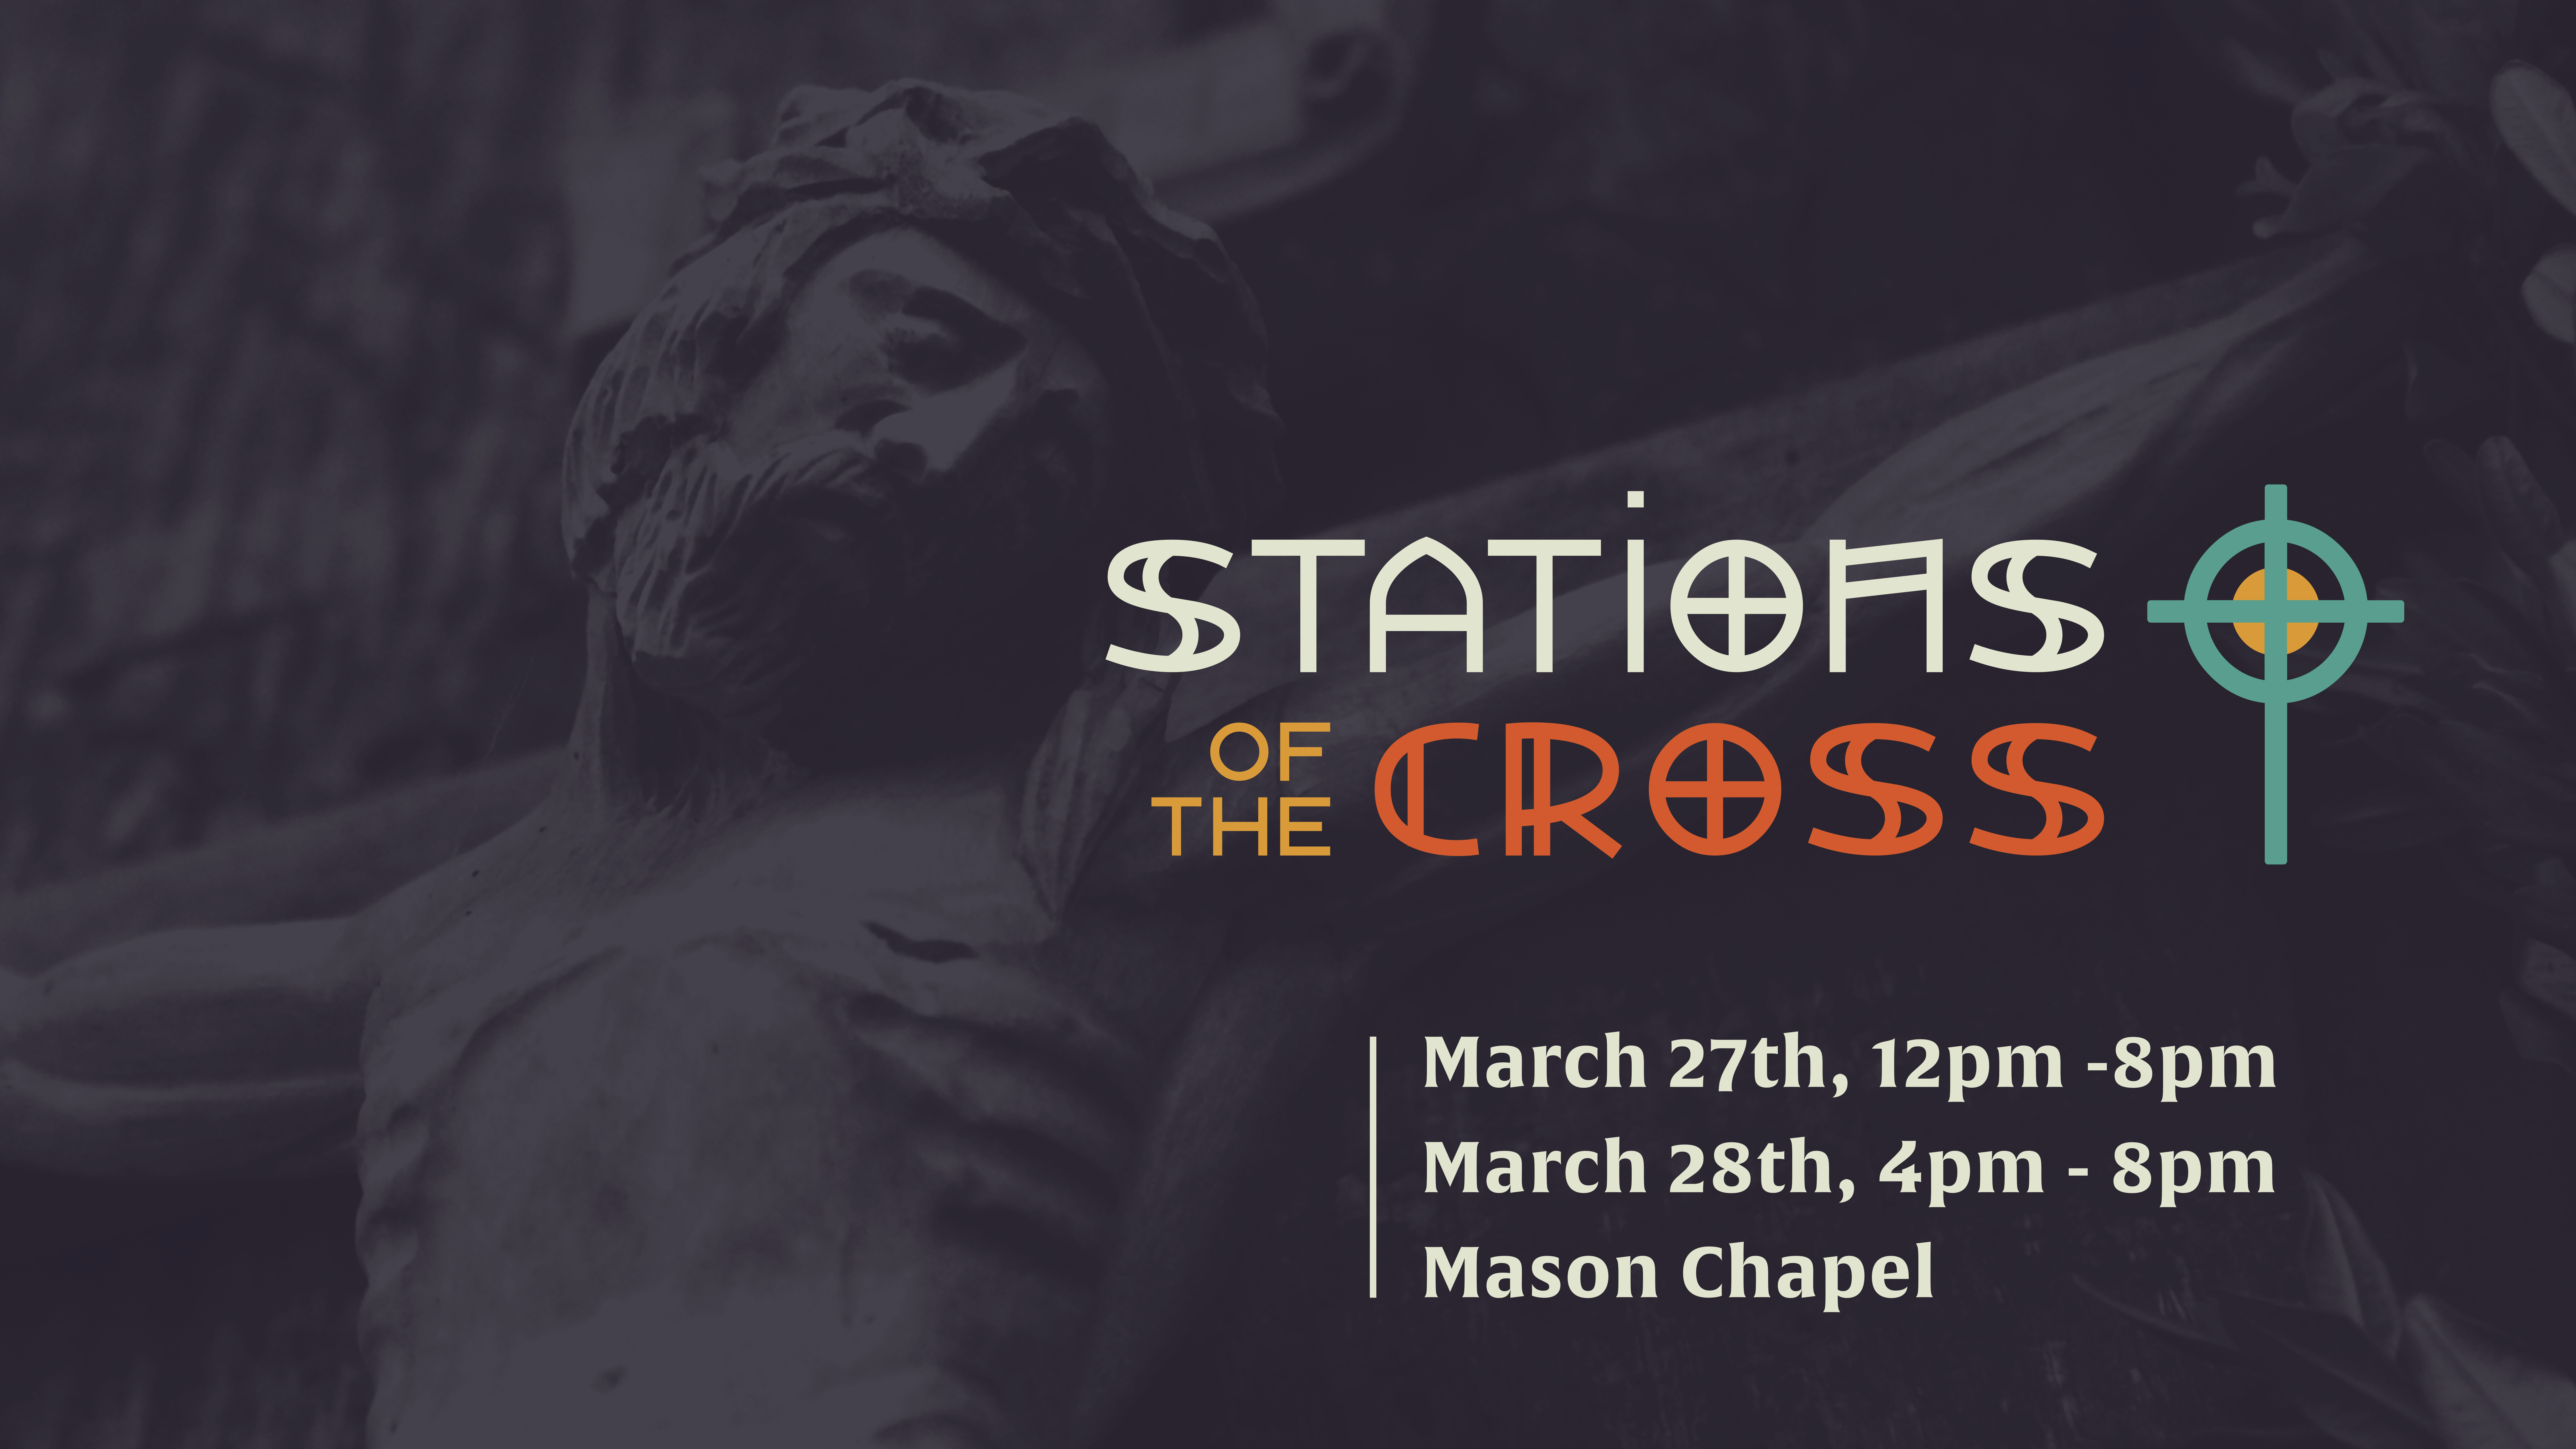 Stations of the Cross 